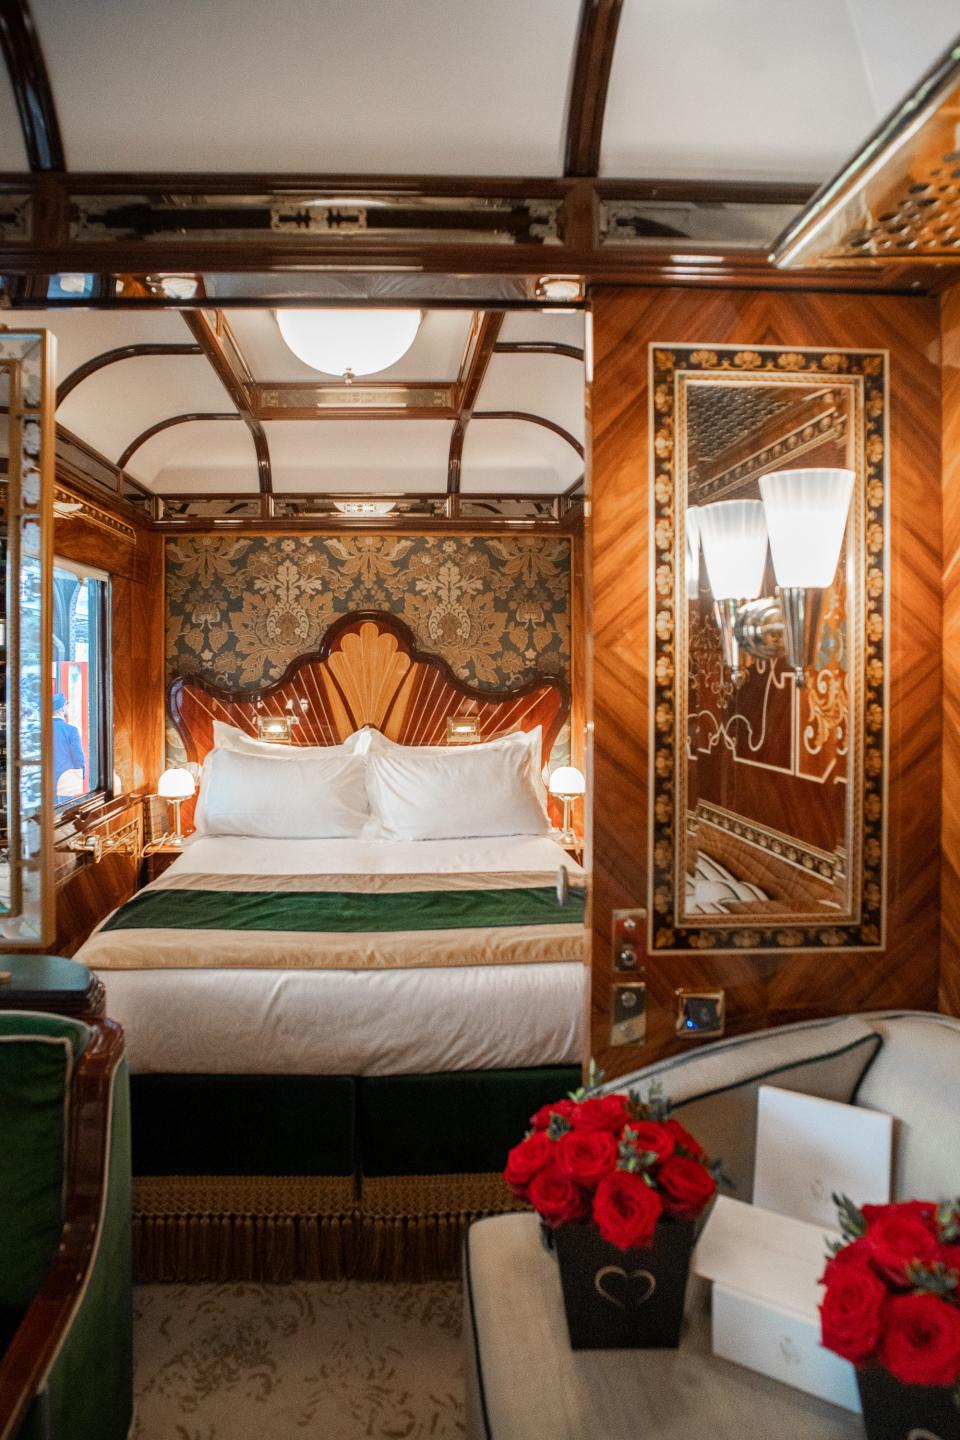 Inside a wood-walled train suite with white and green furnishings, including a seat on the left, a couch on the right, and a bed in the back center.